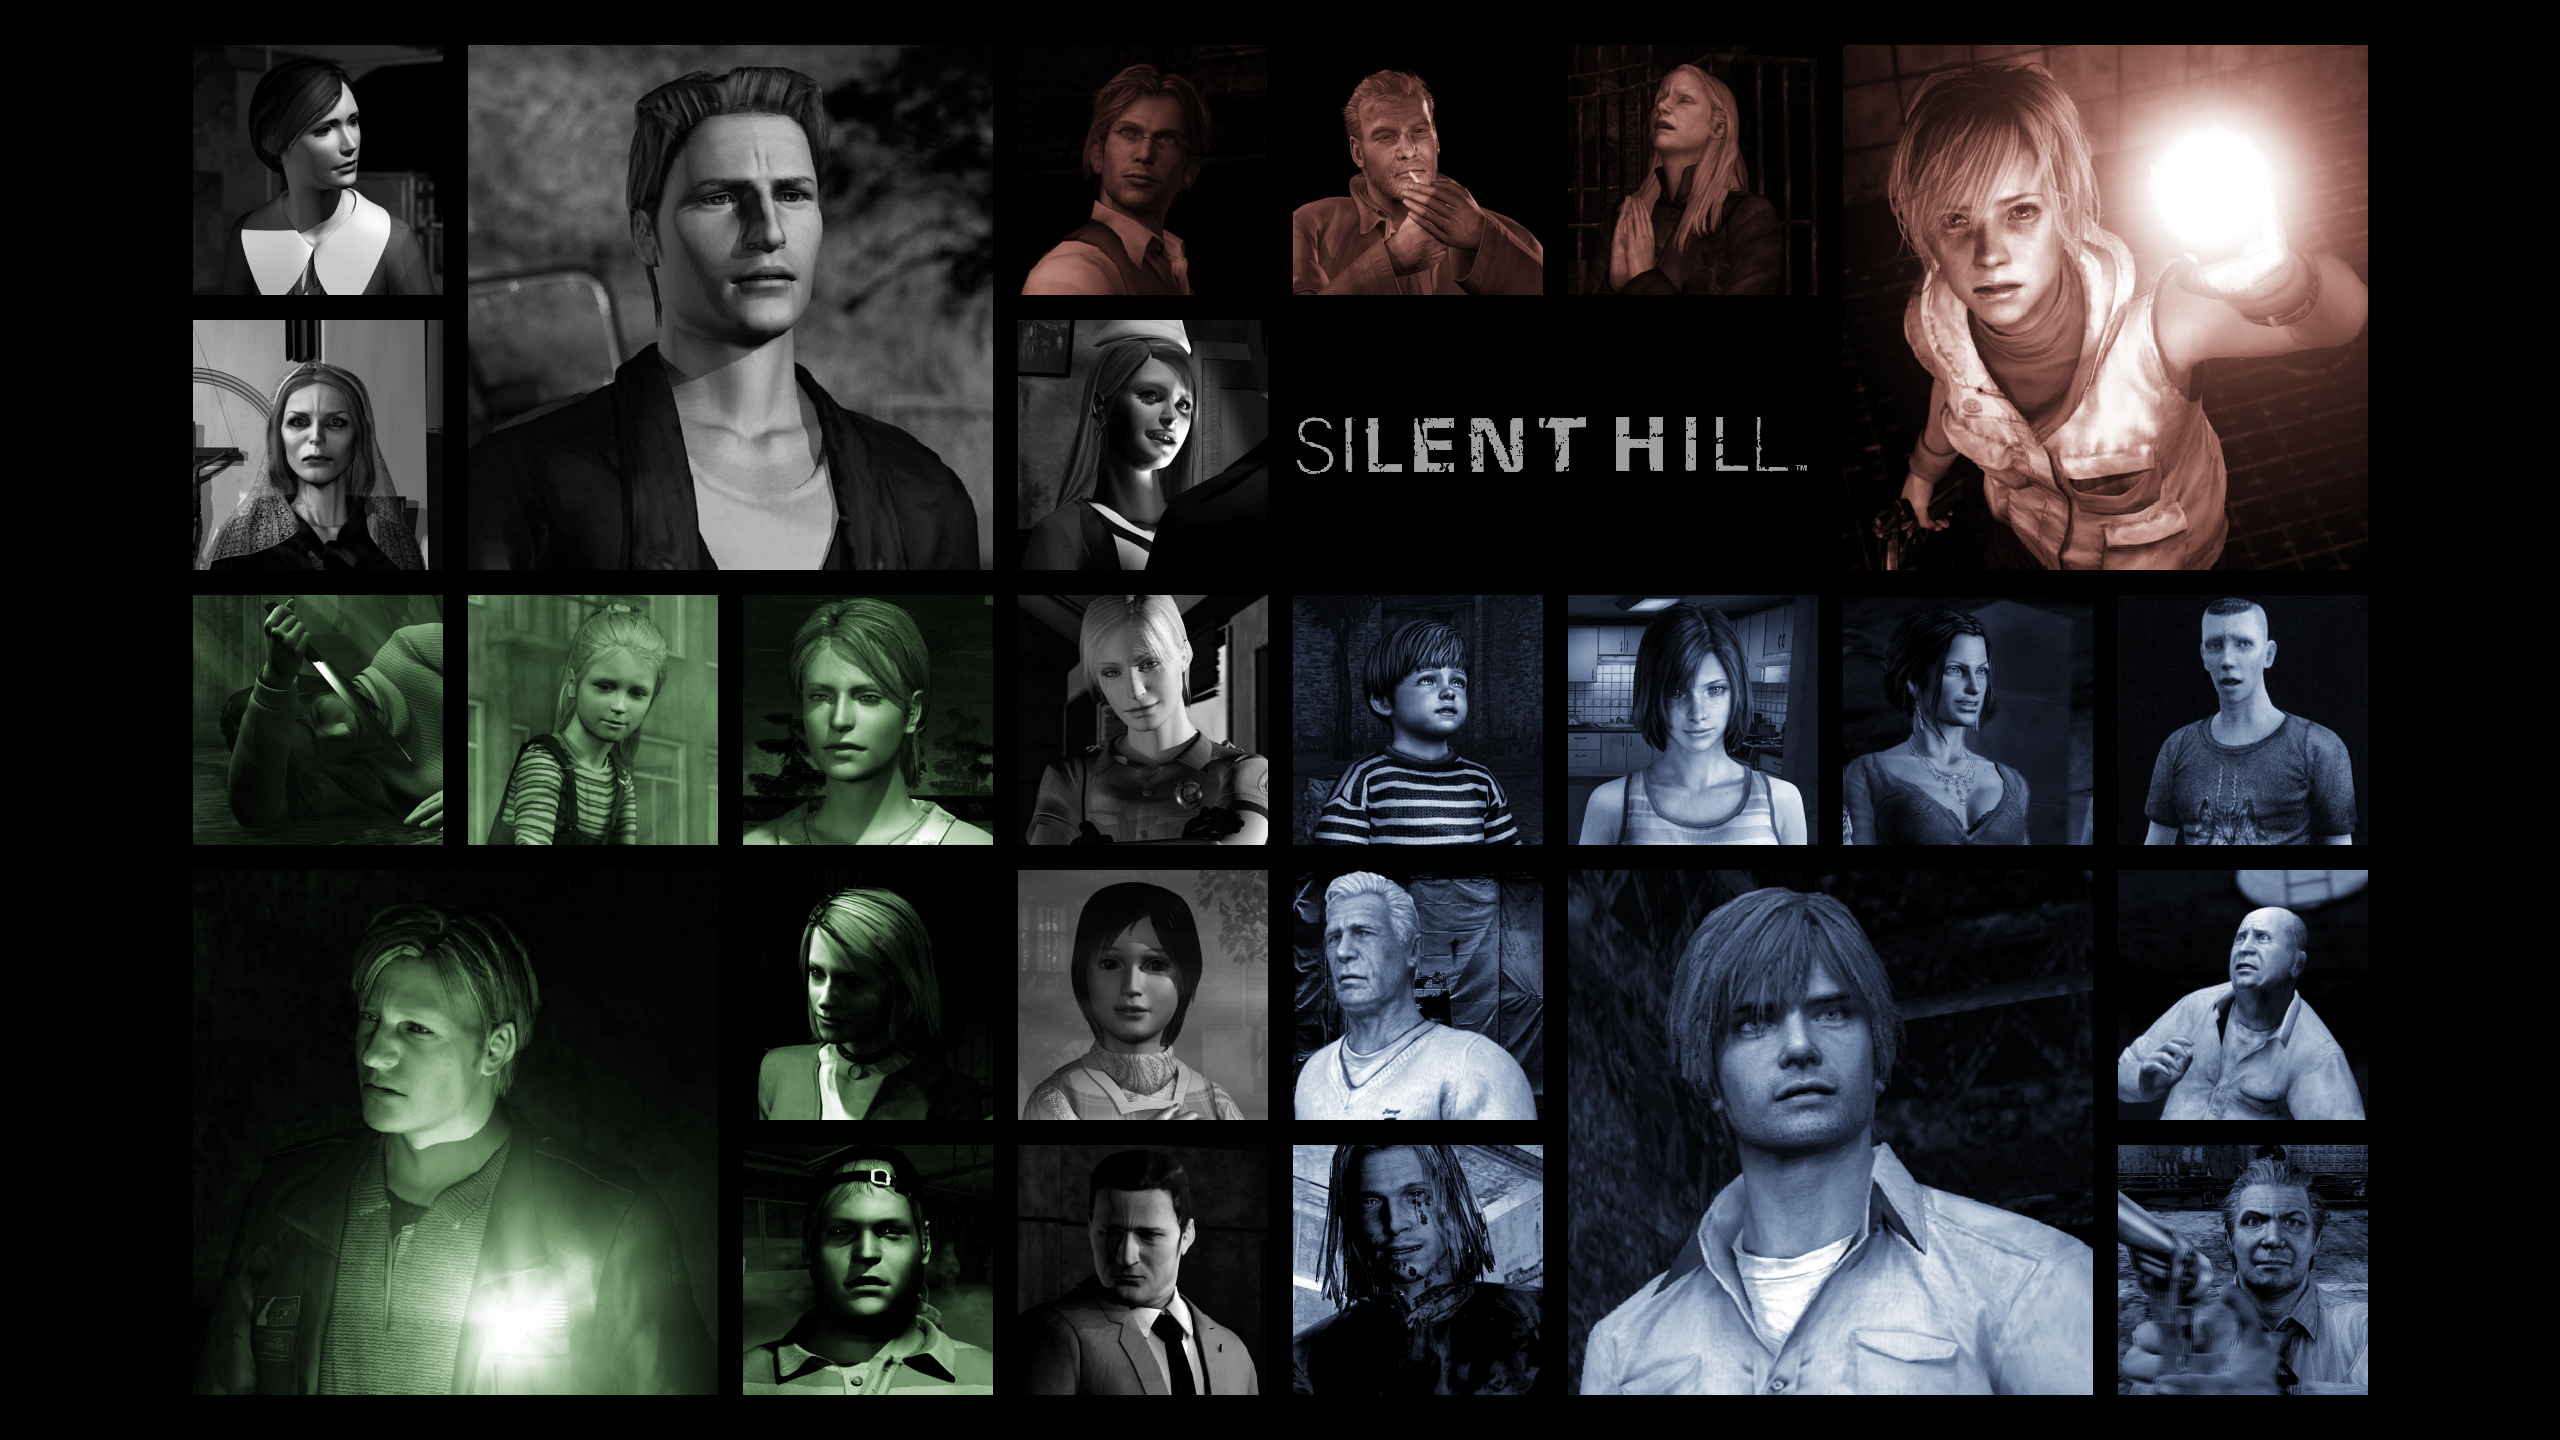  Silent Hill Downpour Hintergrundbild 2560x1440. I made a mosaic out of Silent Hill characters, I decided to share it in case someone would like to use it as a wallpaper or something